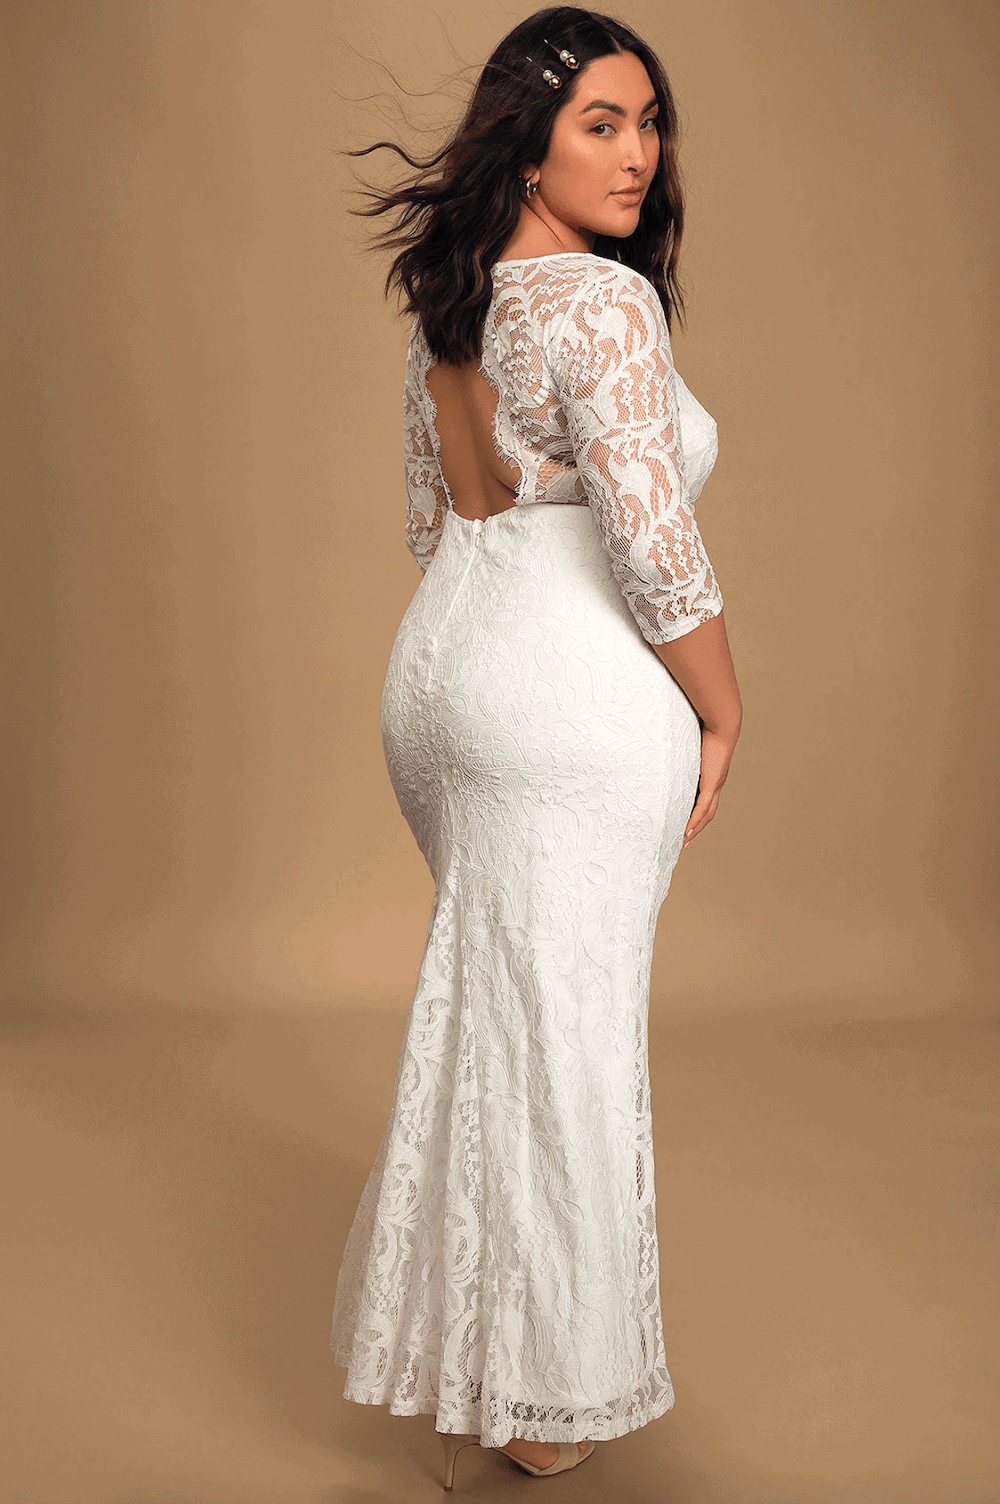 Plus Size Wedding Dresses with Sleeves Cheap Online Curvy Brides Lace Backless Dress Lulus